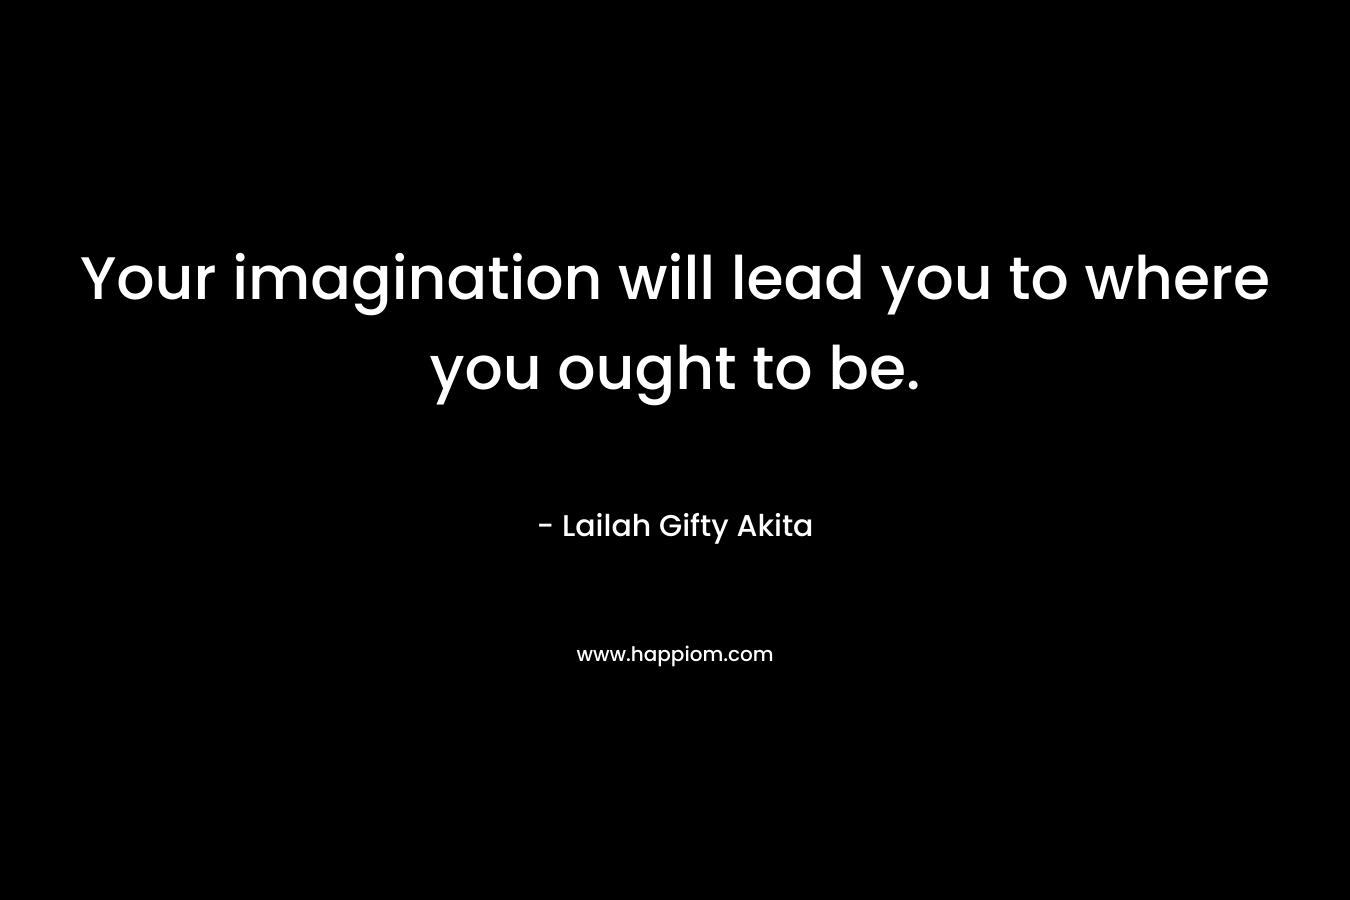 Your imagination will lead you to where you ought to be.